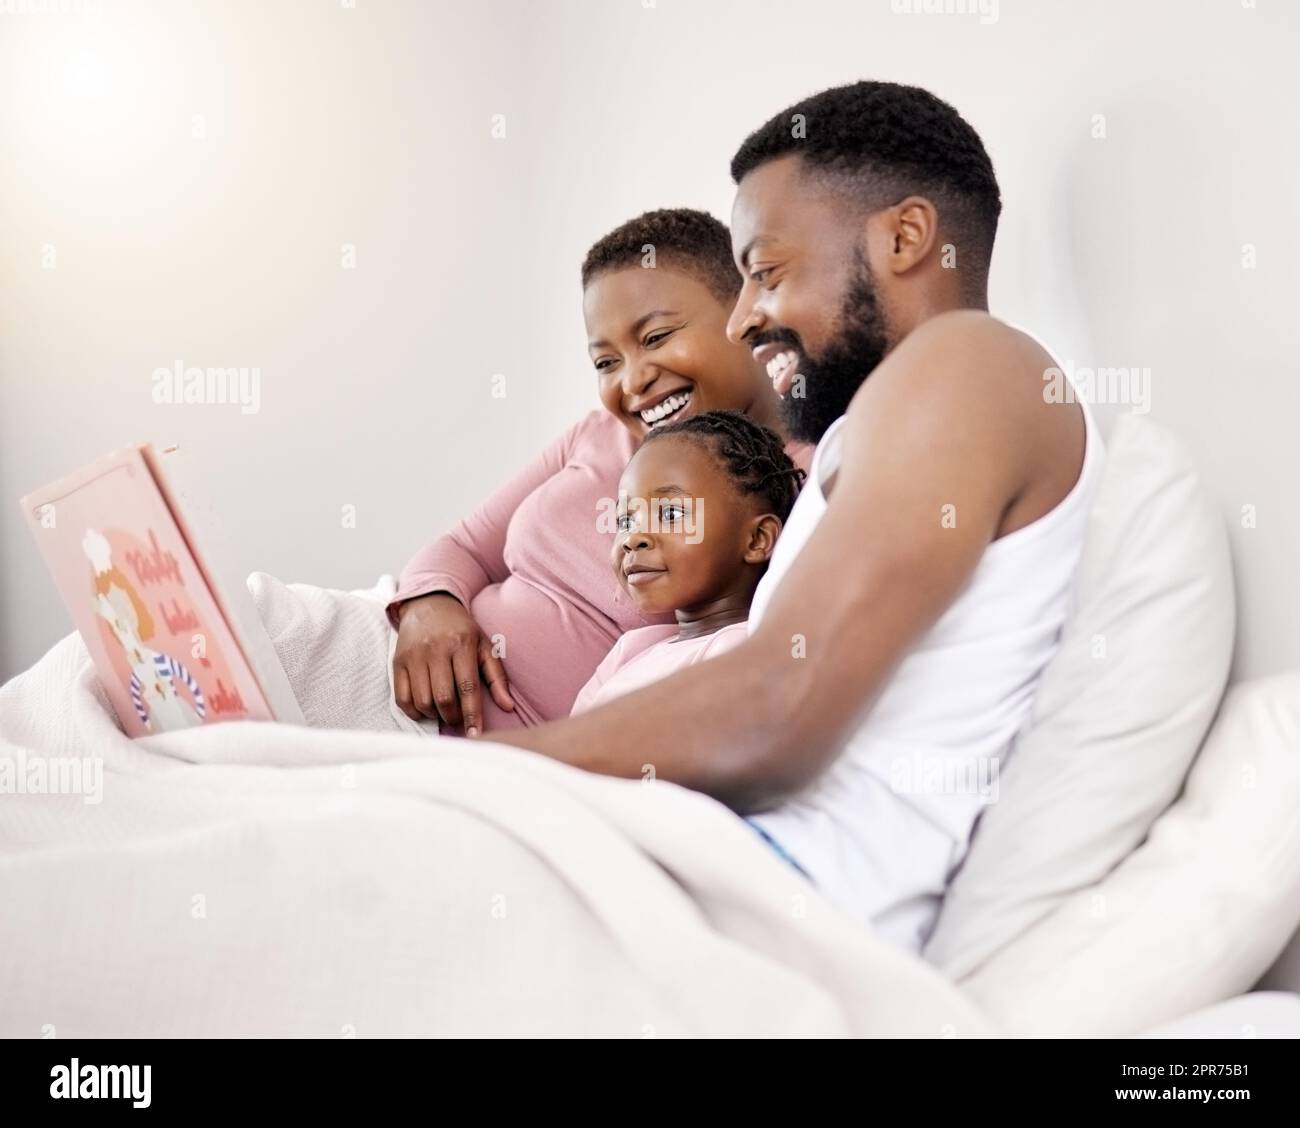 Were unavailable to the world today. Shot of a young family bonding in bed together. Stock Photo